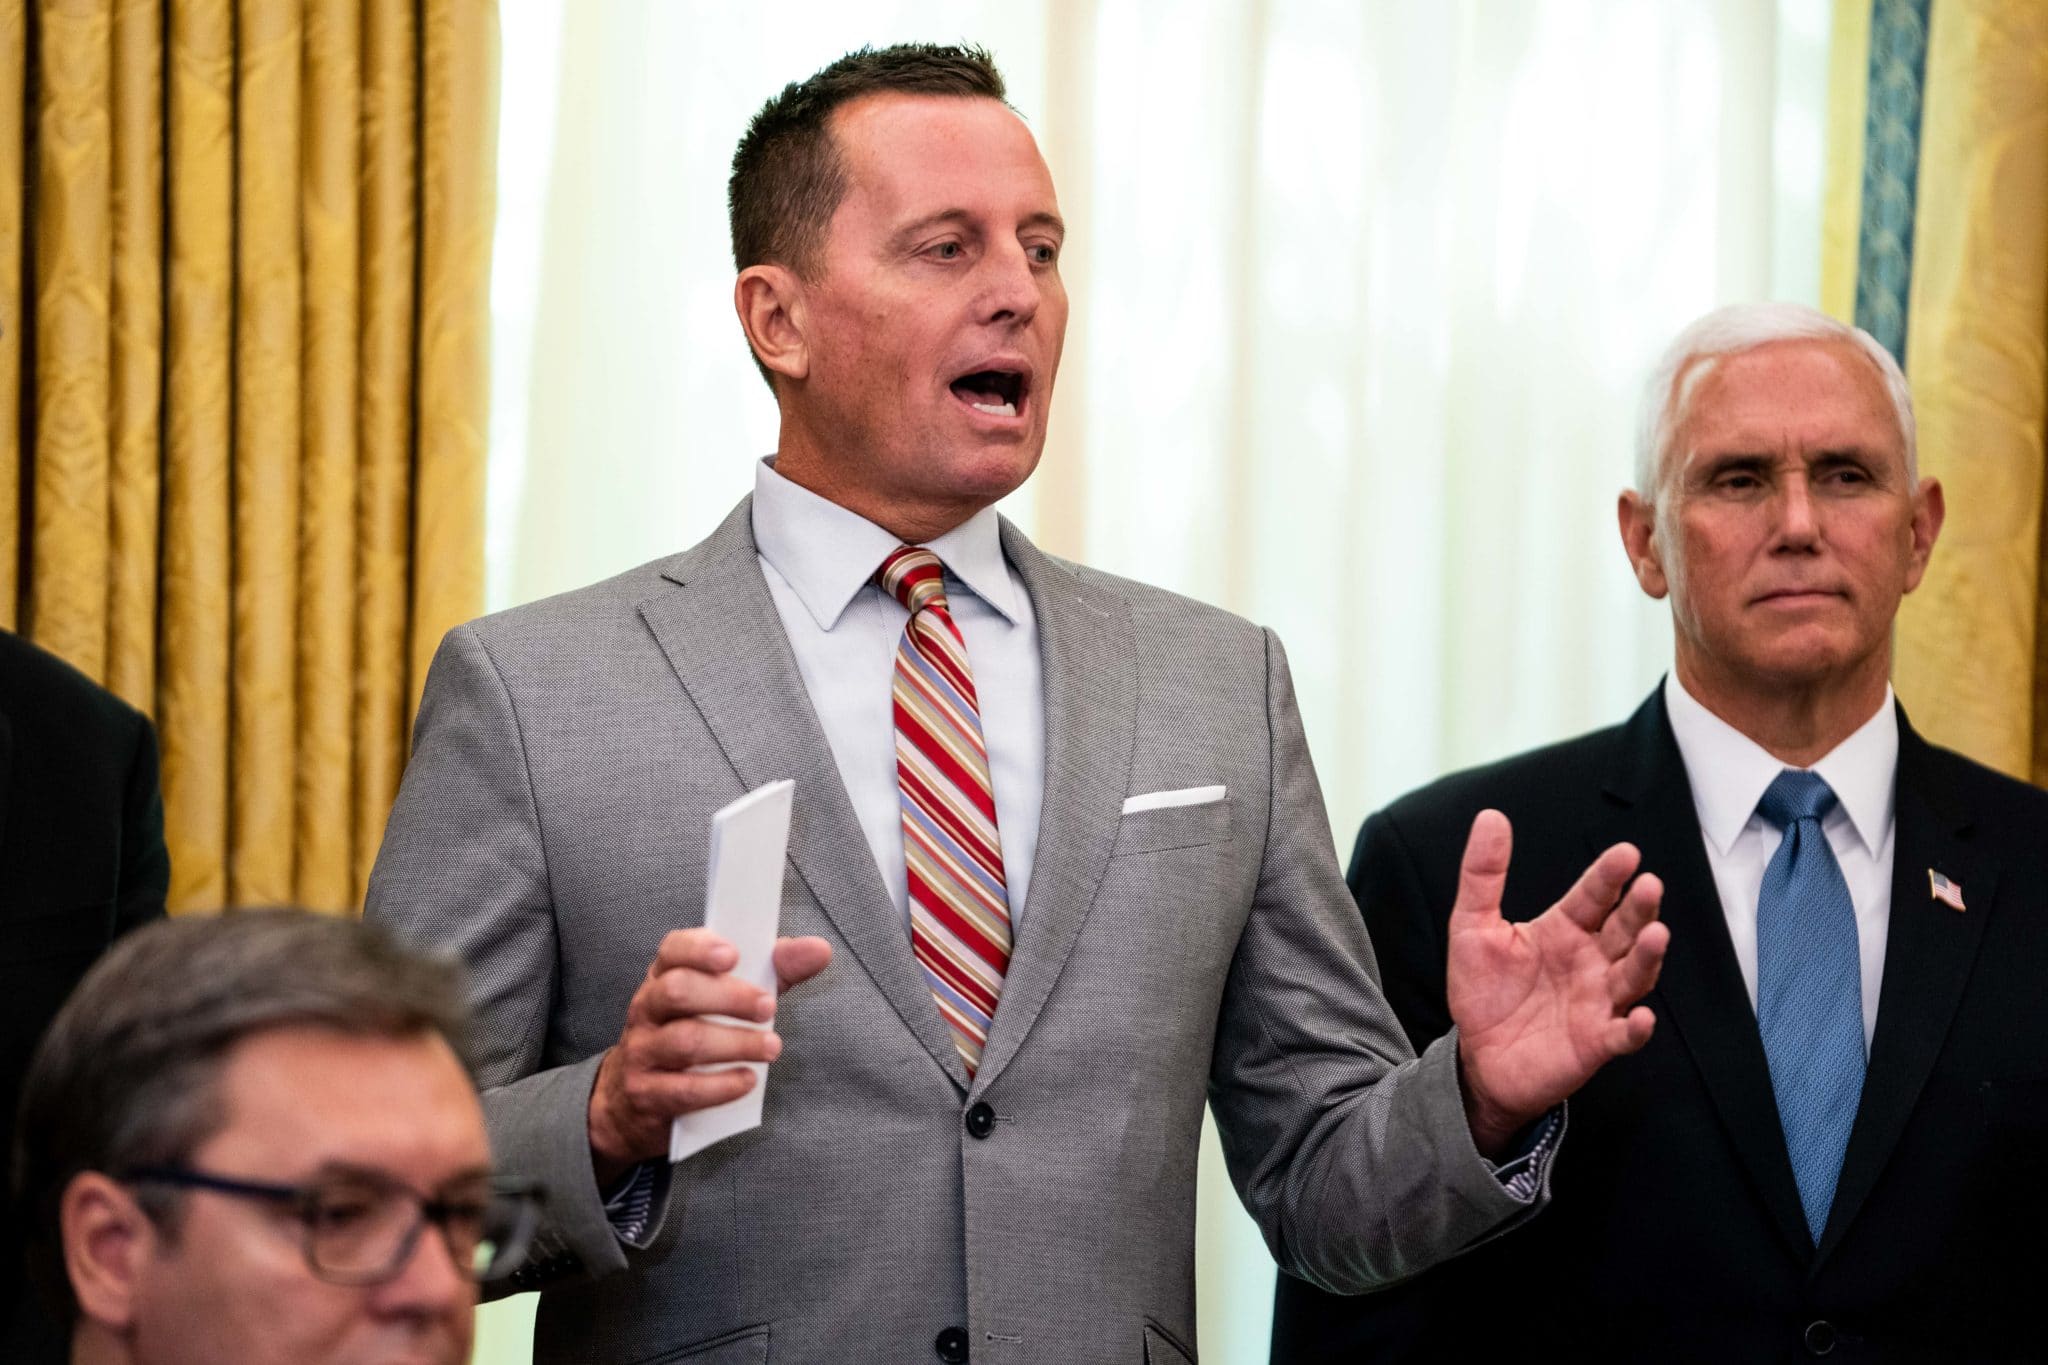 Former acting Director of National Intelligence Richard Grenell